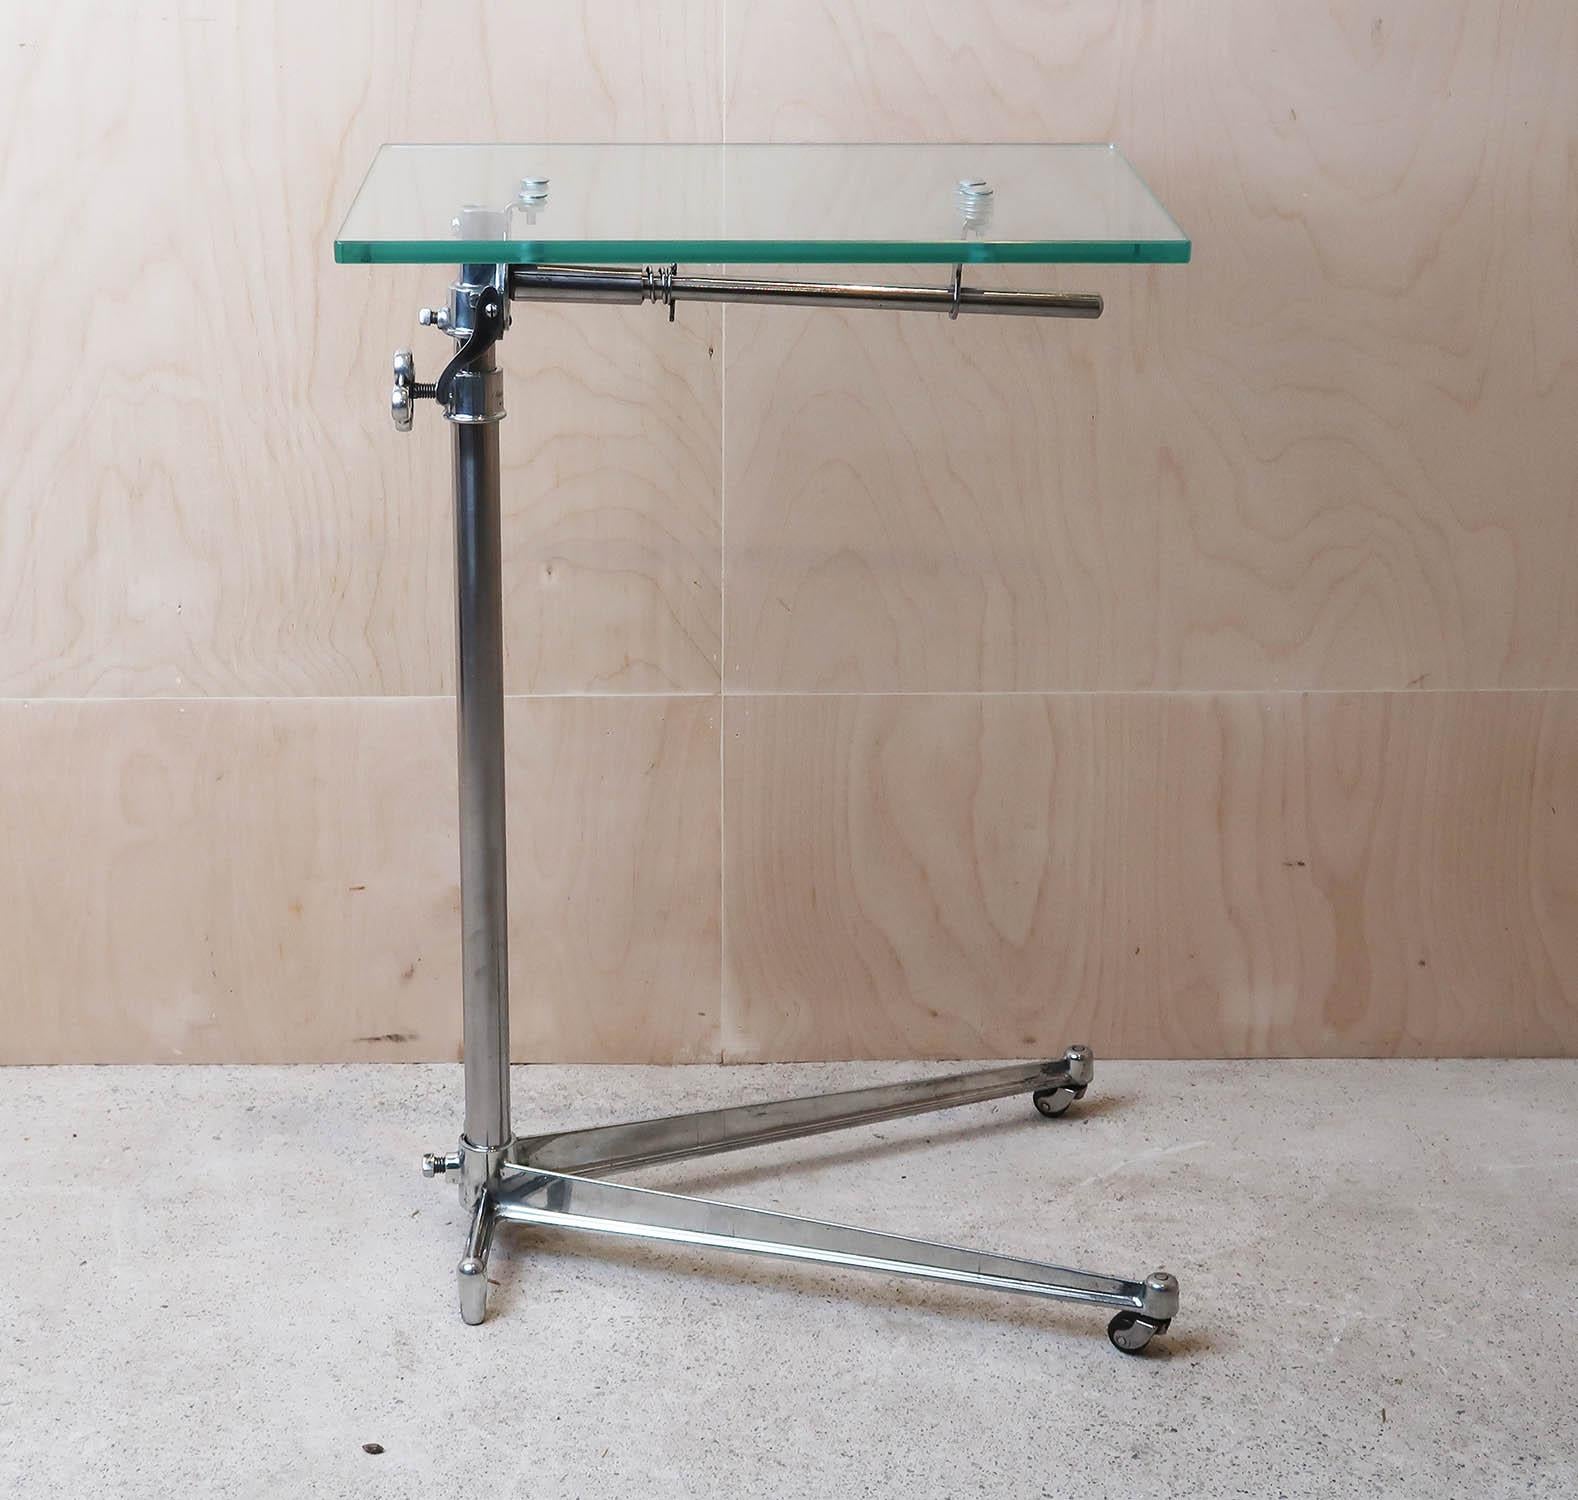 Stylish side or work table with an elegant Industrial look.

Made of polished steel with a new toughened glass top.

The top is adjustable by loosening the handle on the side.

The top can also be tilted.

On the original pot castors it can be